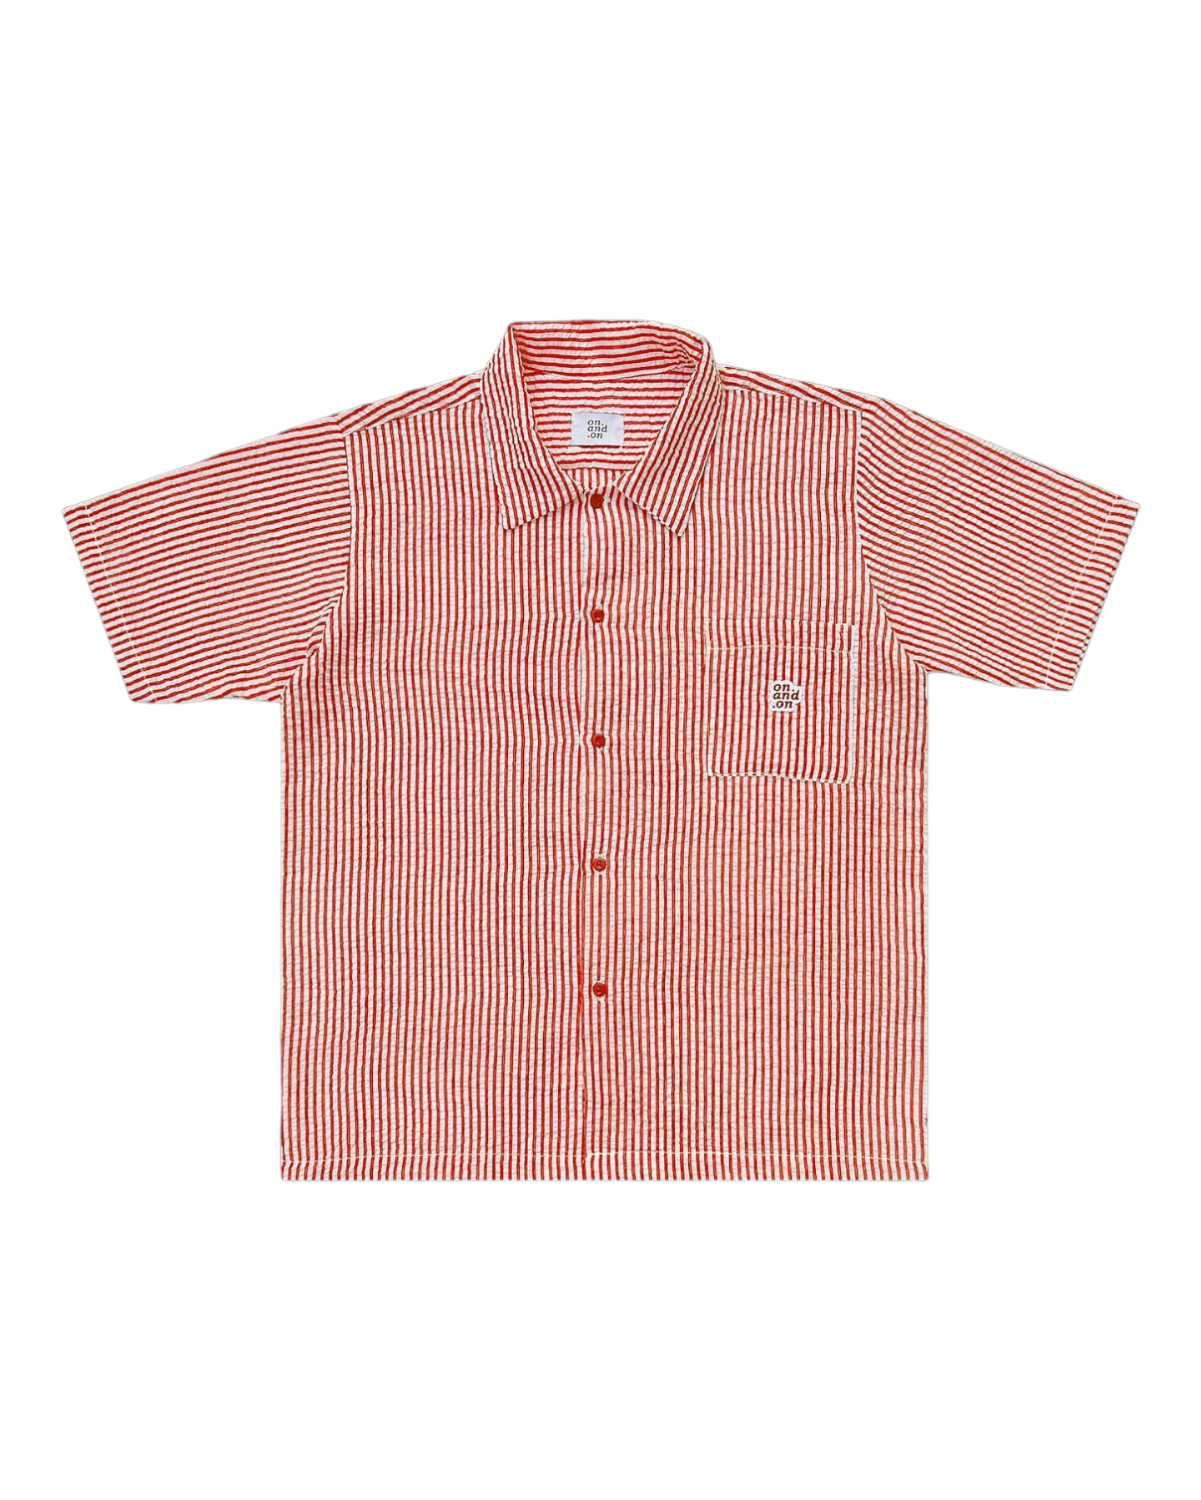 Dazzle Shirt (Red)